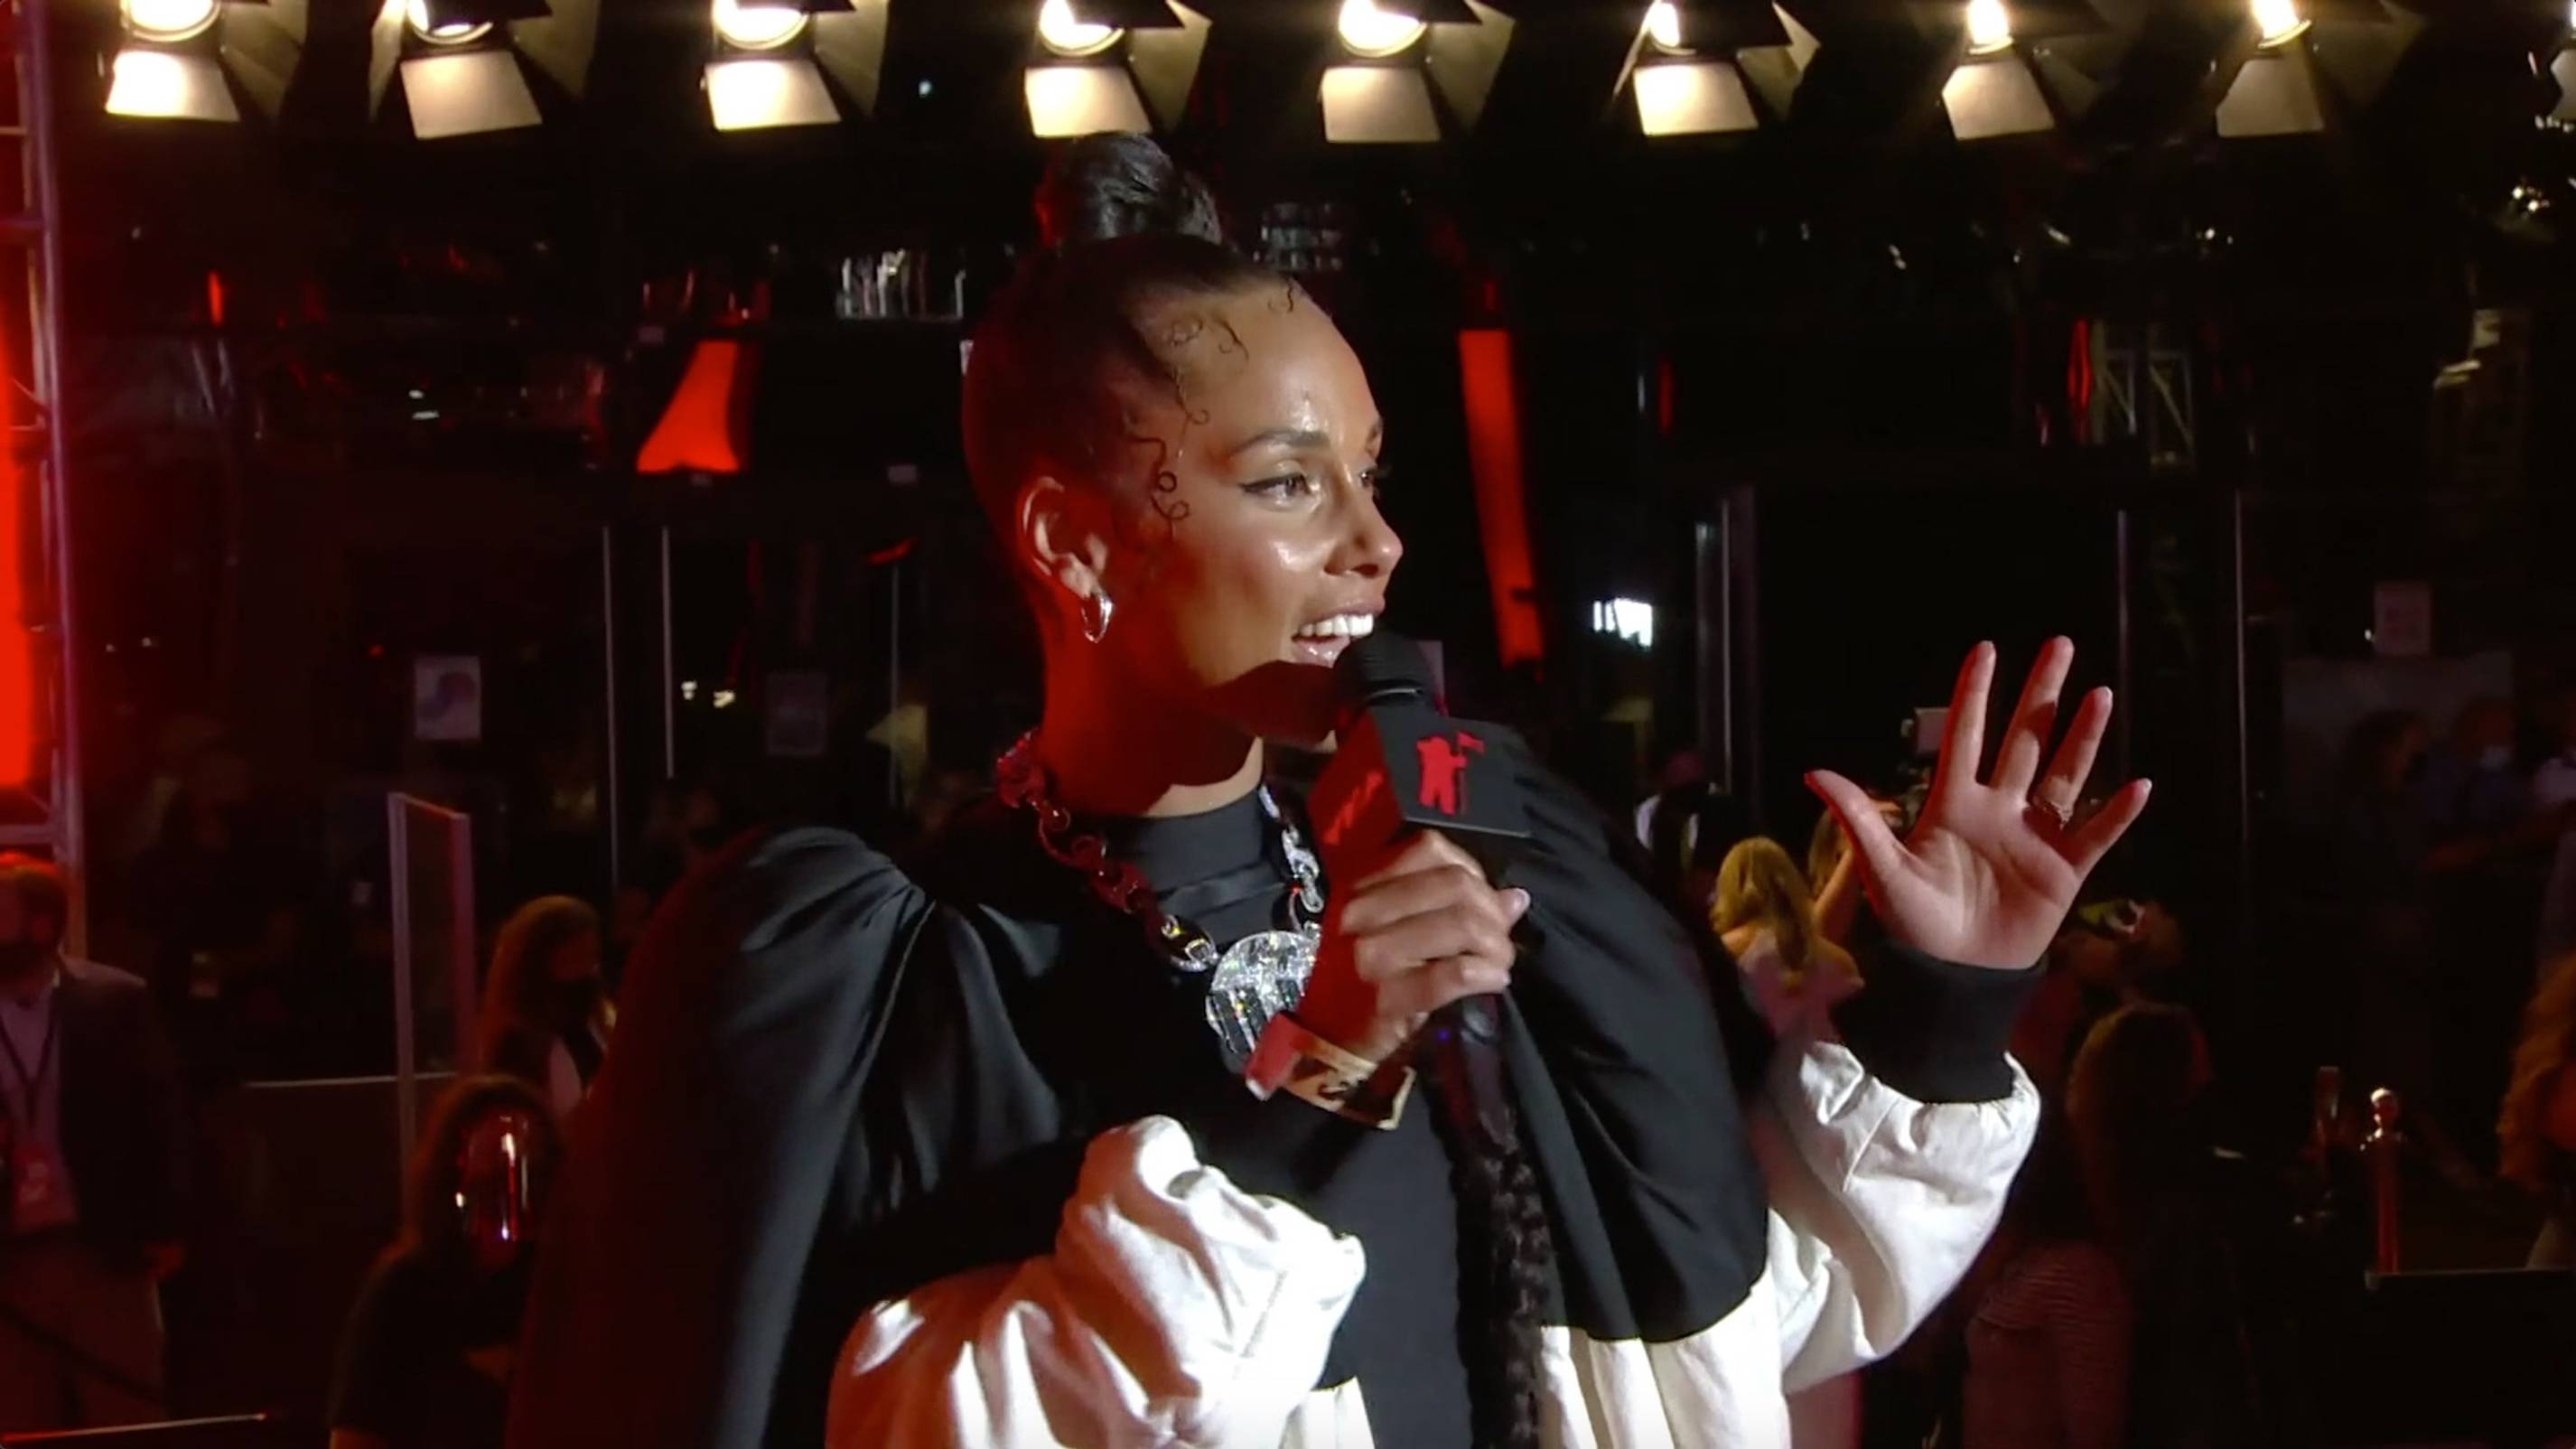 Alicia Keys talks about what viewers can expect from her when she hits the stage, including a performance of her sultry new single "LALA (Unlocked)" with Swae Lee and a tribute to New York.